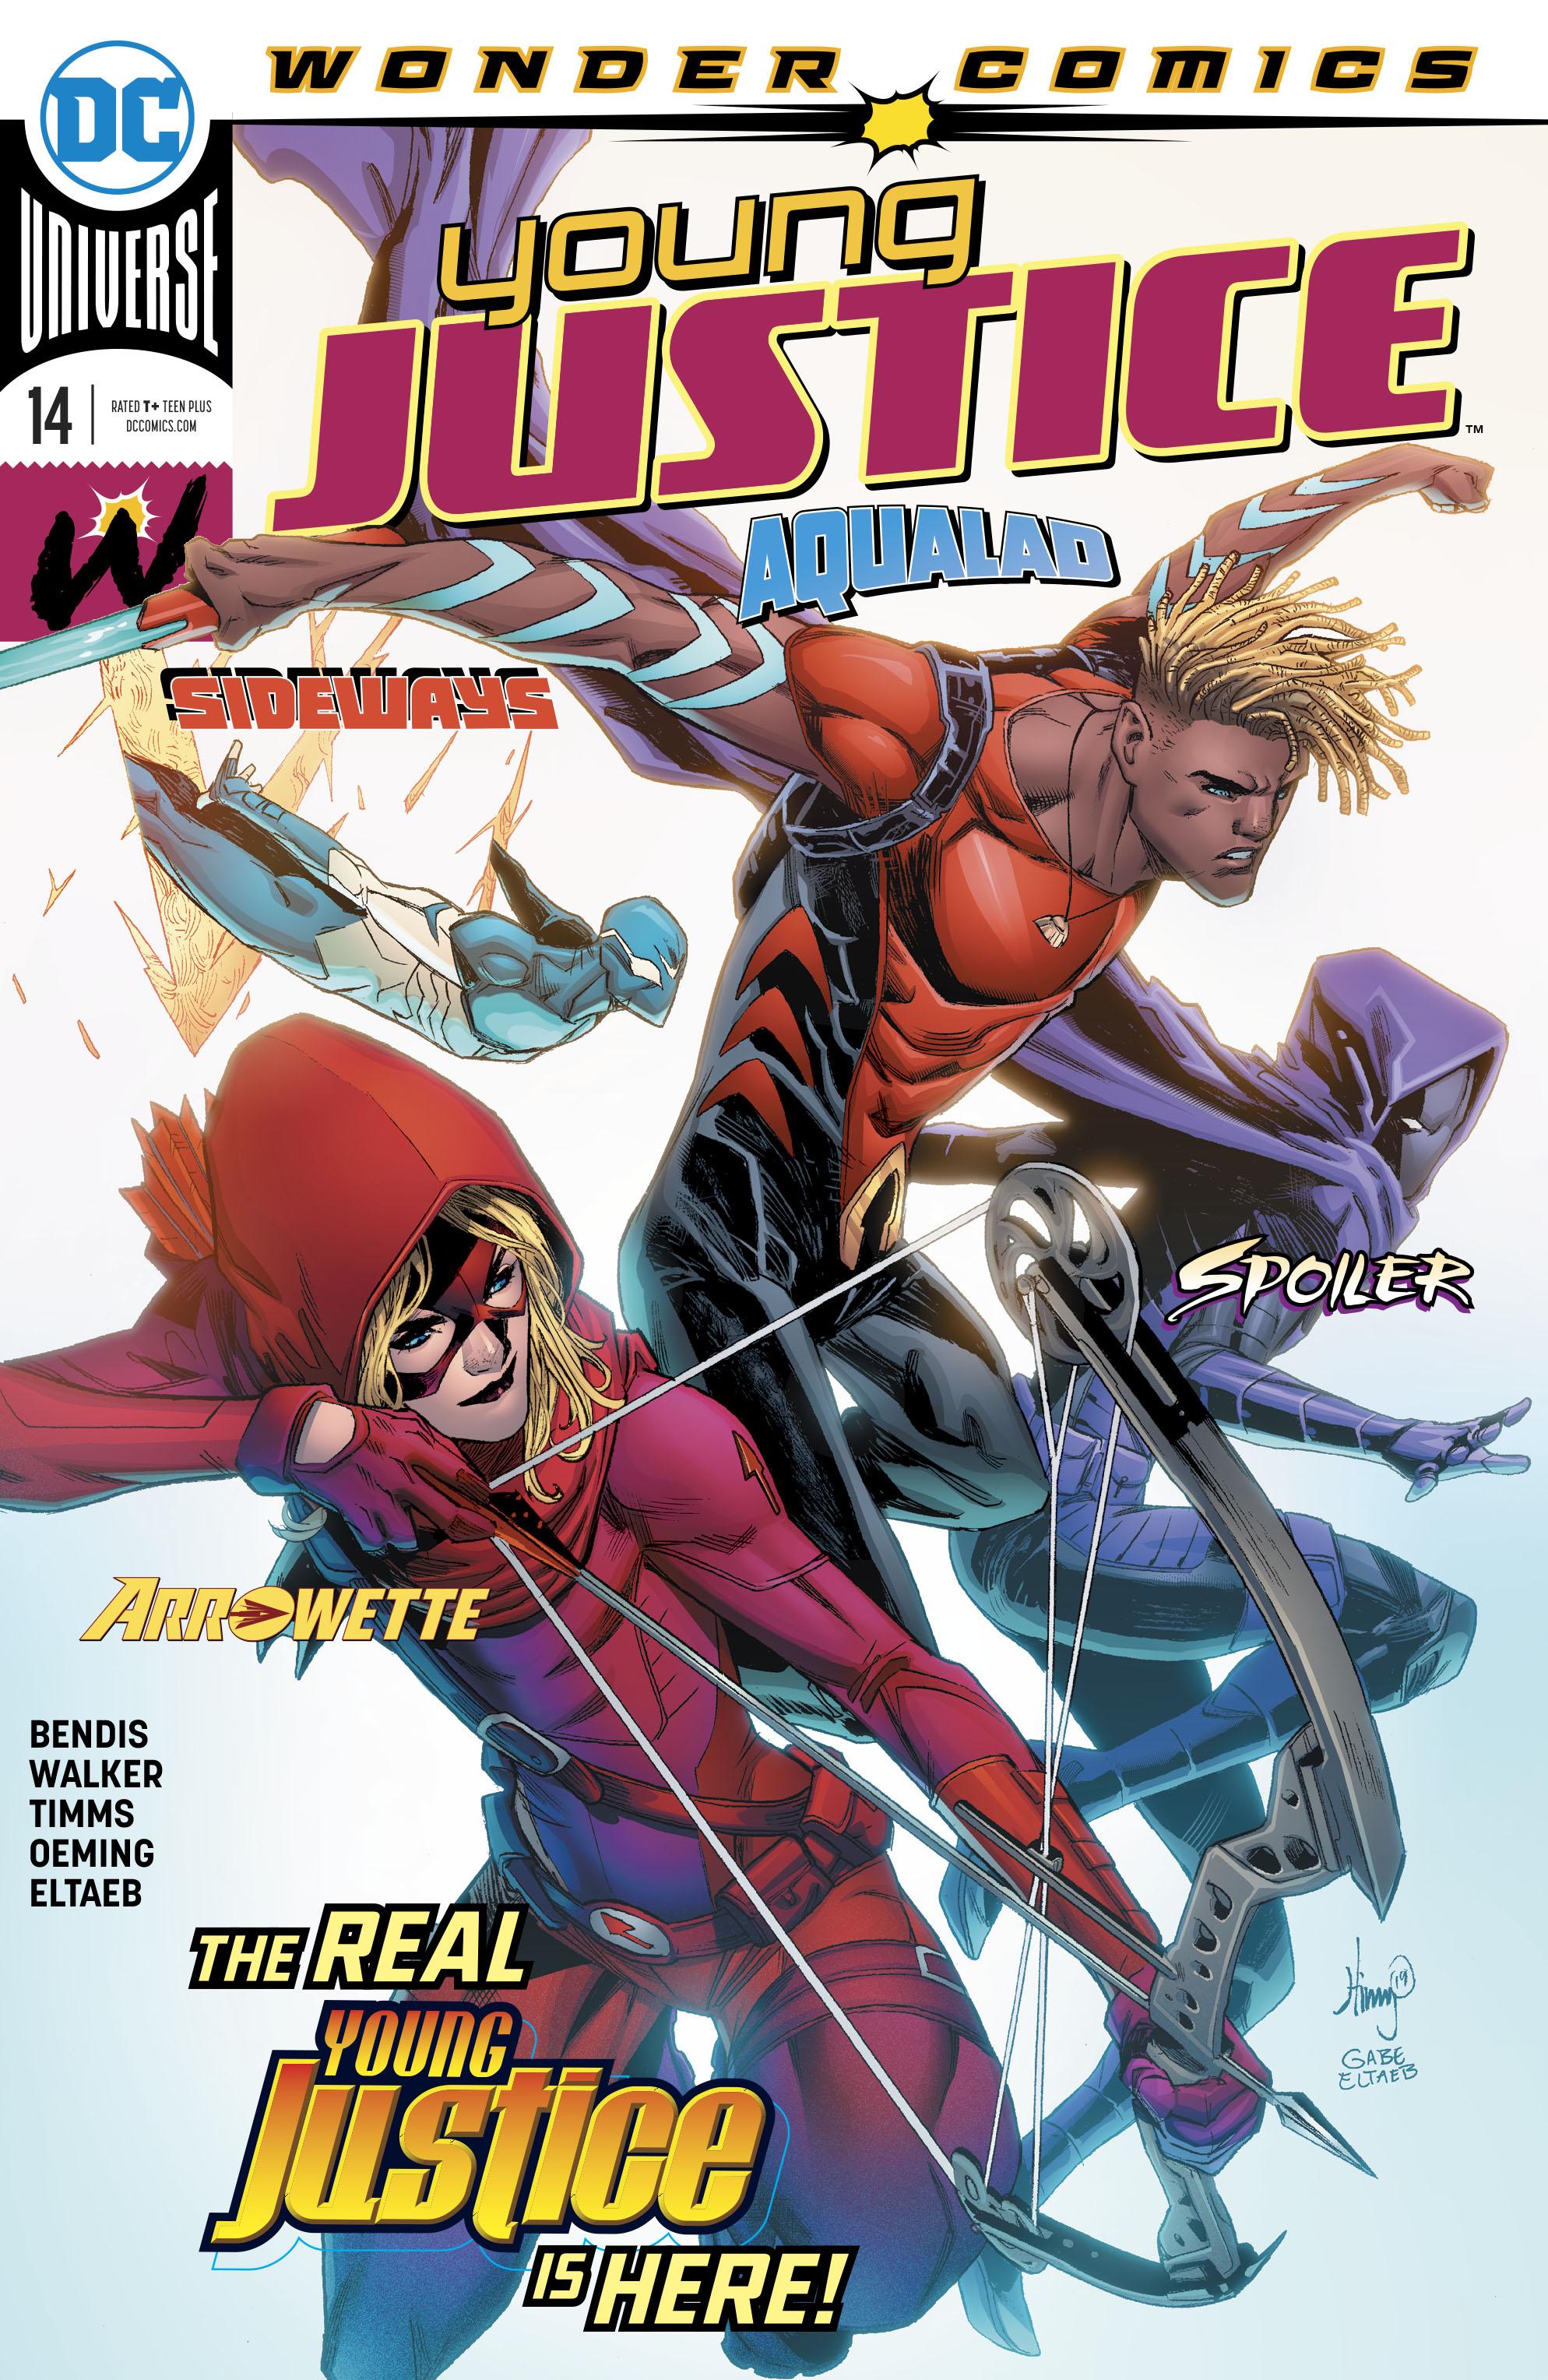 Young Justice Vol. 3 #14